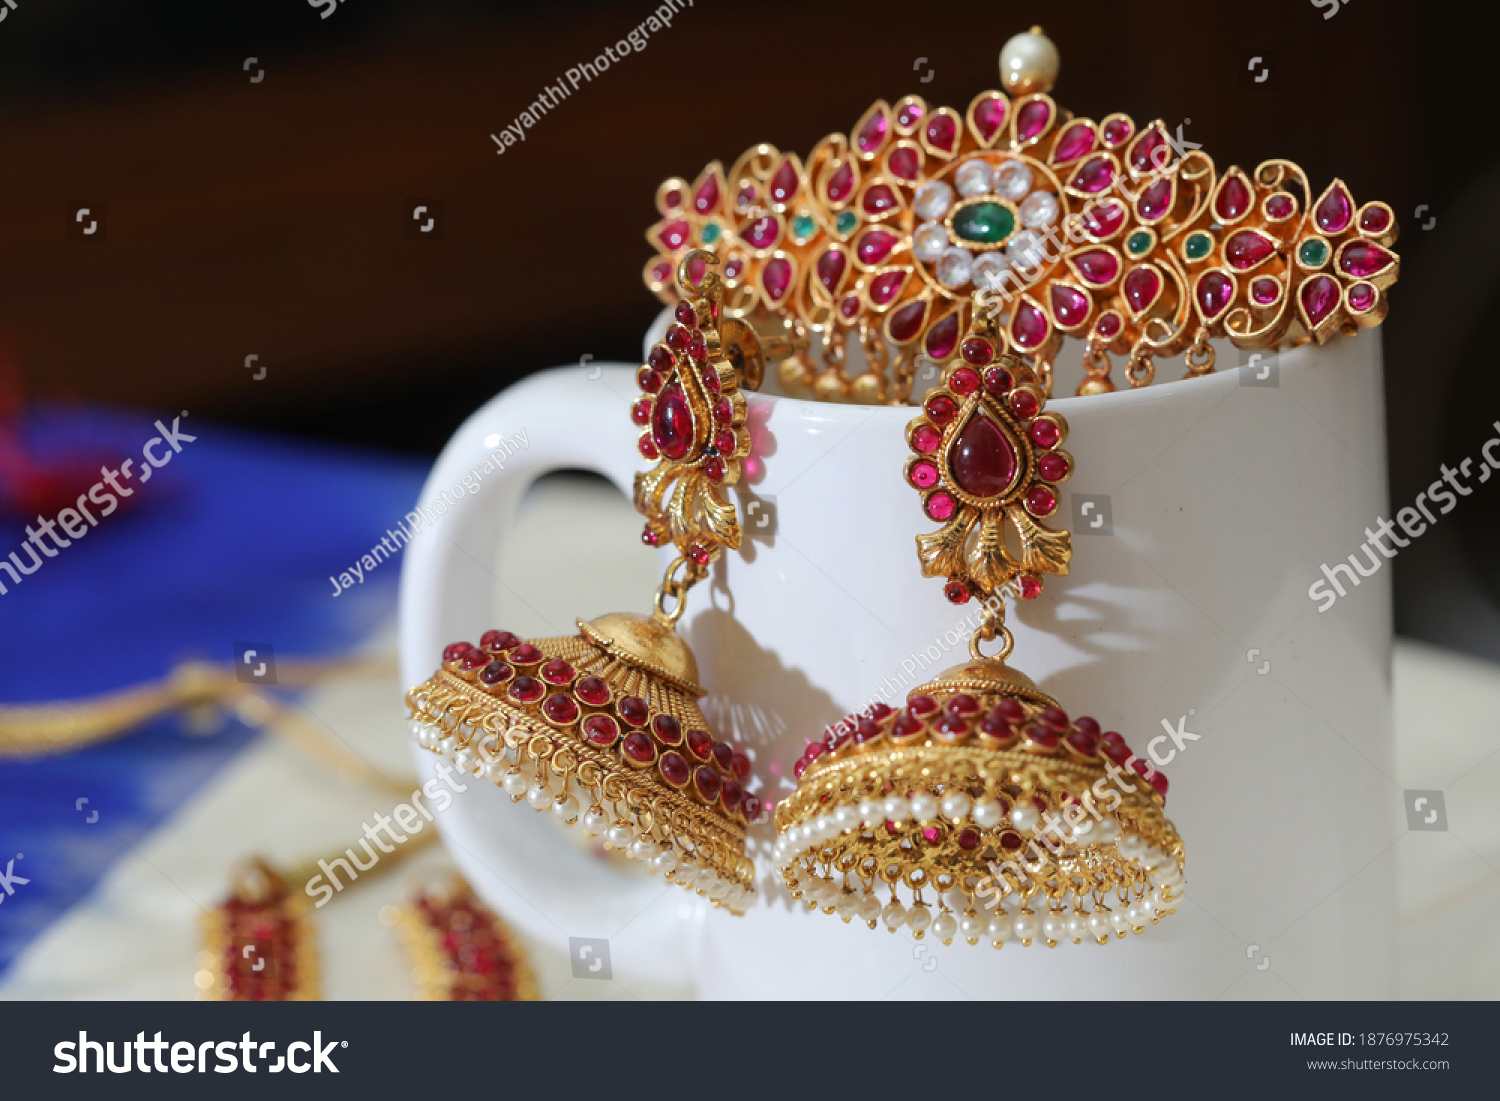 close up of head clip and a pair of temple jewelry arranged on a white porcelain cup #1876975342